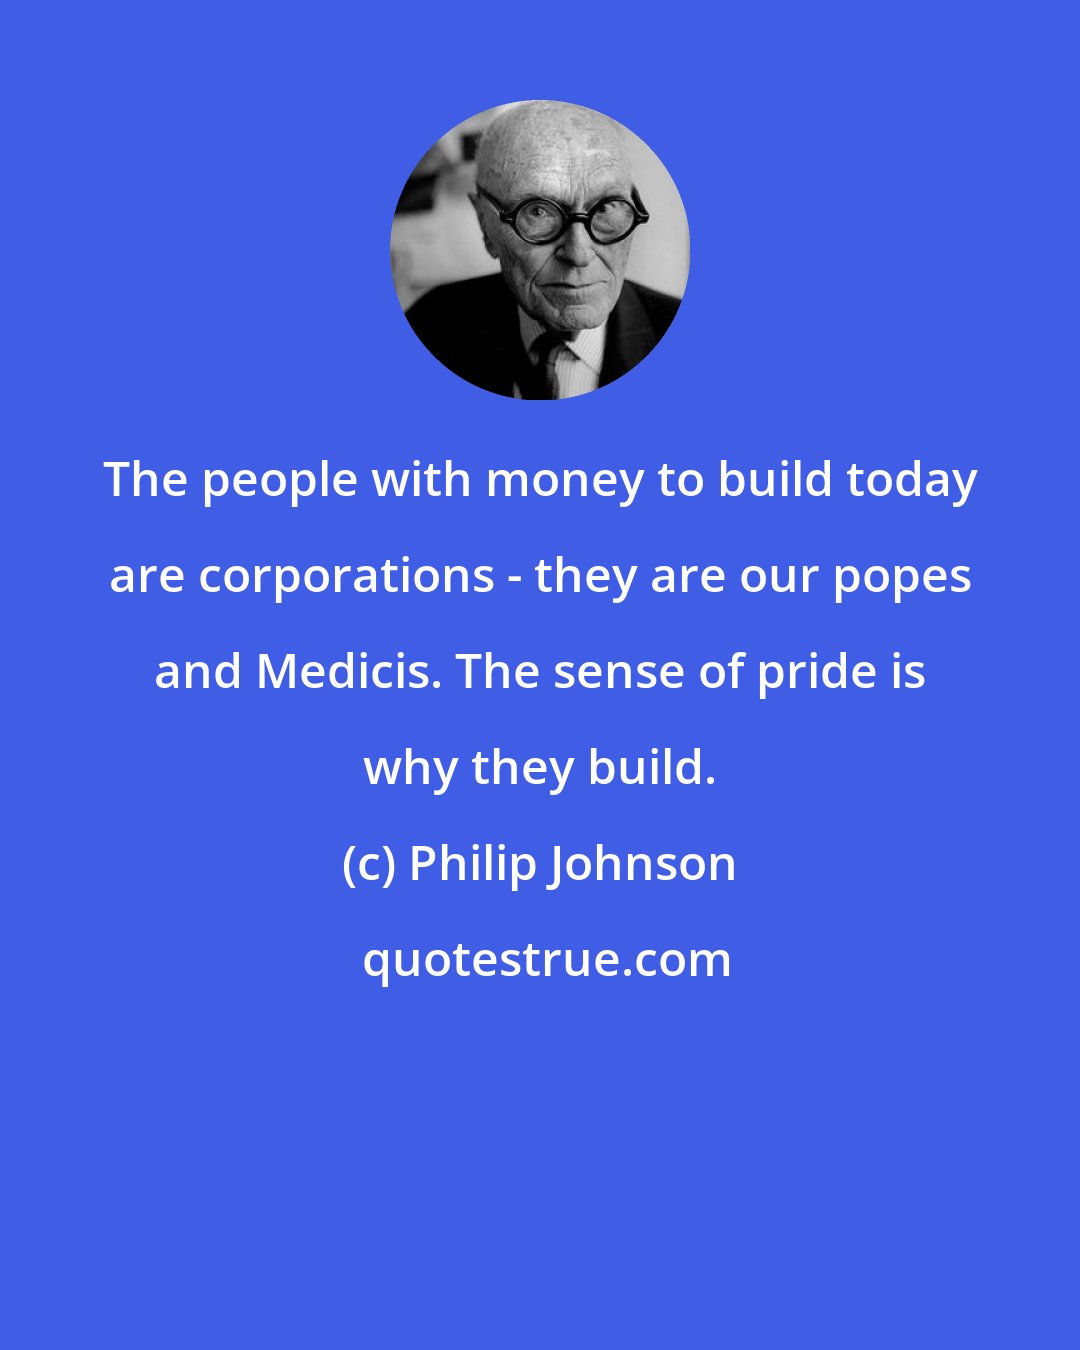 Philip Johnson: The people with money to build today are corporations - they are our popes and Medicis. The sense of pride is why they build.